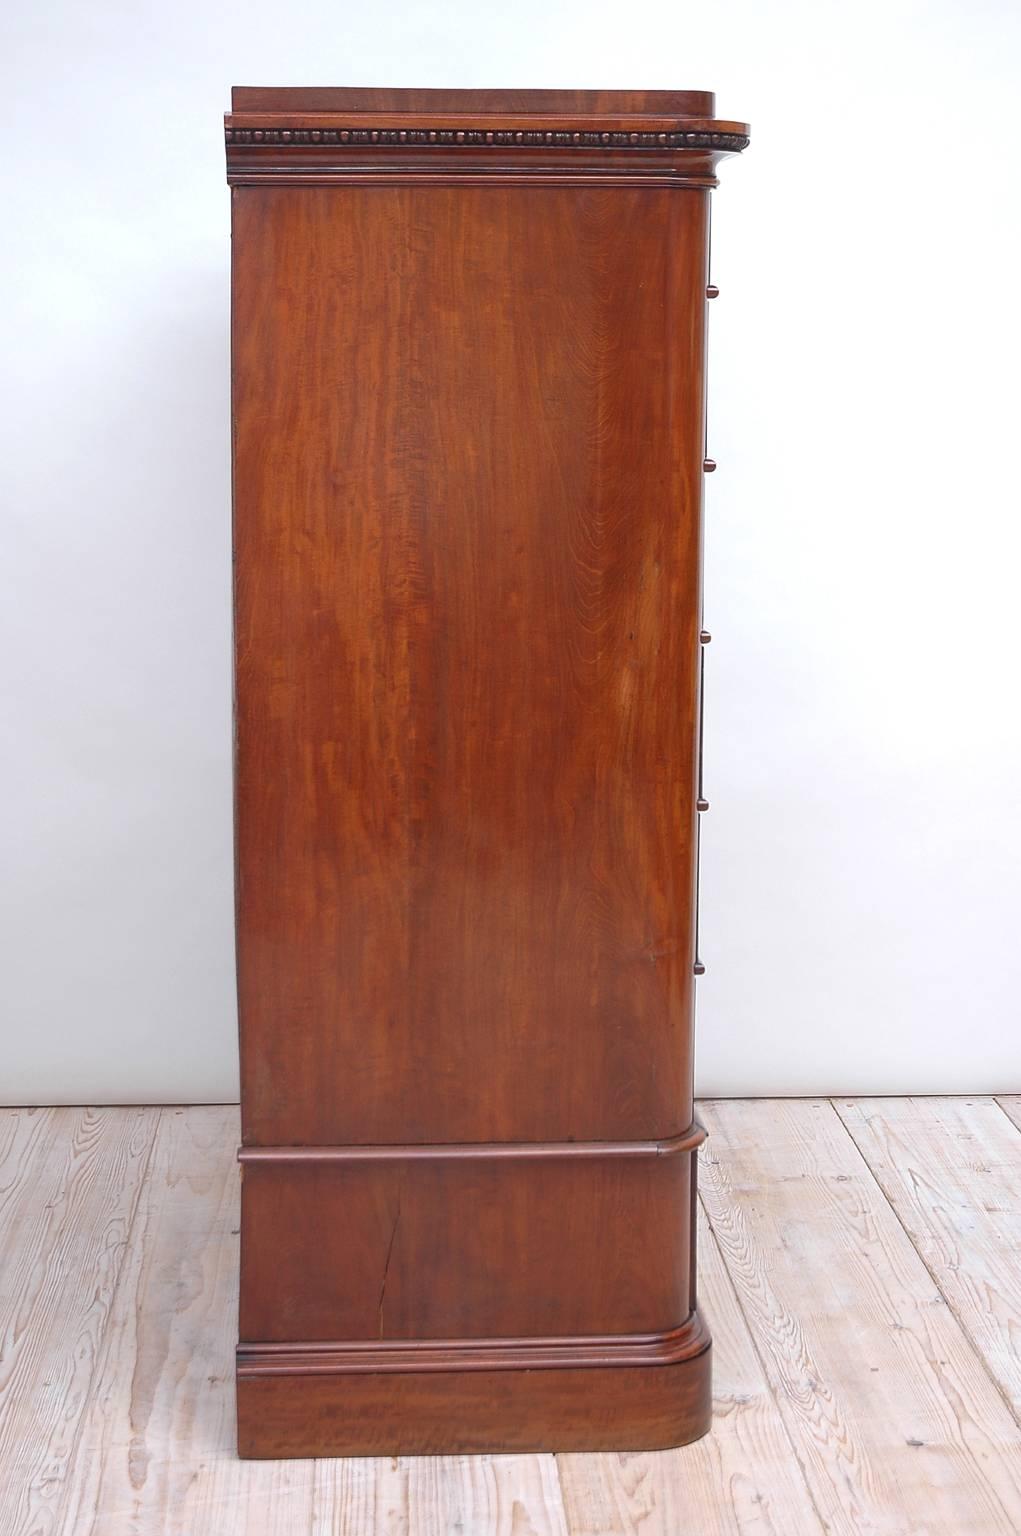 Danish Antique Biedermeier Tall Chest of Drawers in Bookmatched Mahogany, Denmark, 1840 For Sale